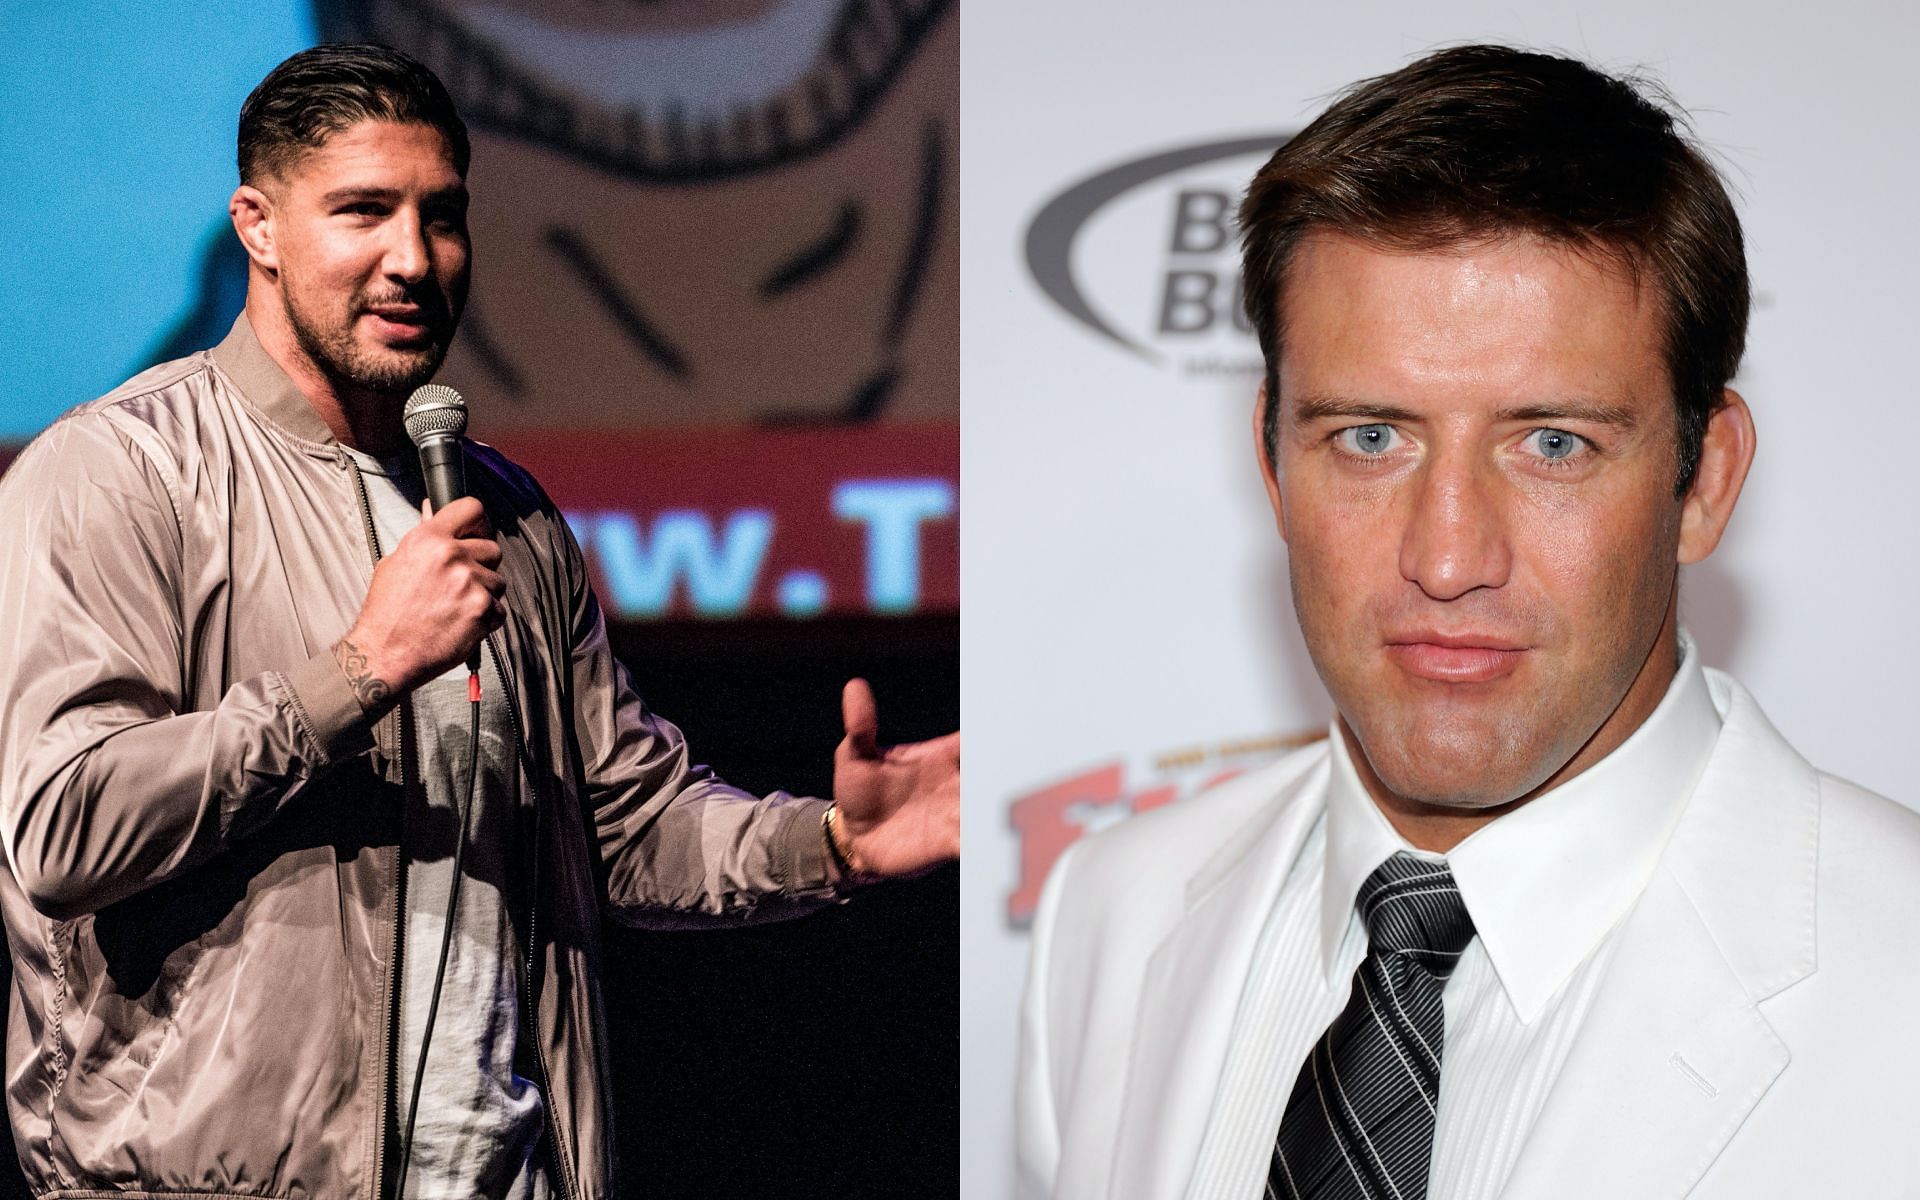 Brendan Schaub (left) and Stephen Bonnar (right) [Image courtesy: Getty Images and Brendan Schaub via Wikipedia Commons] 